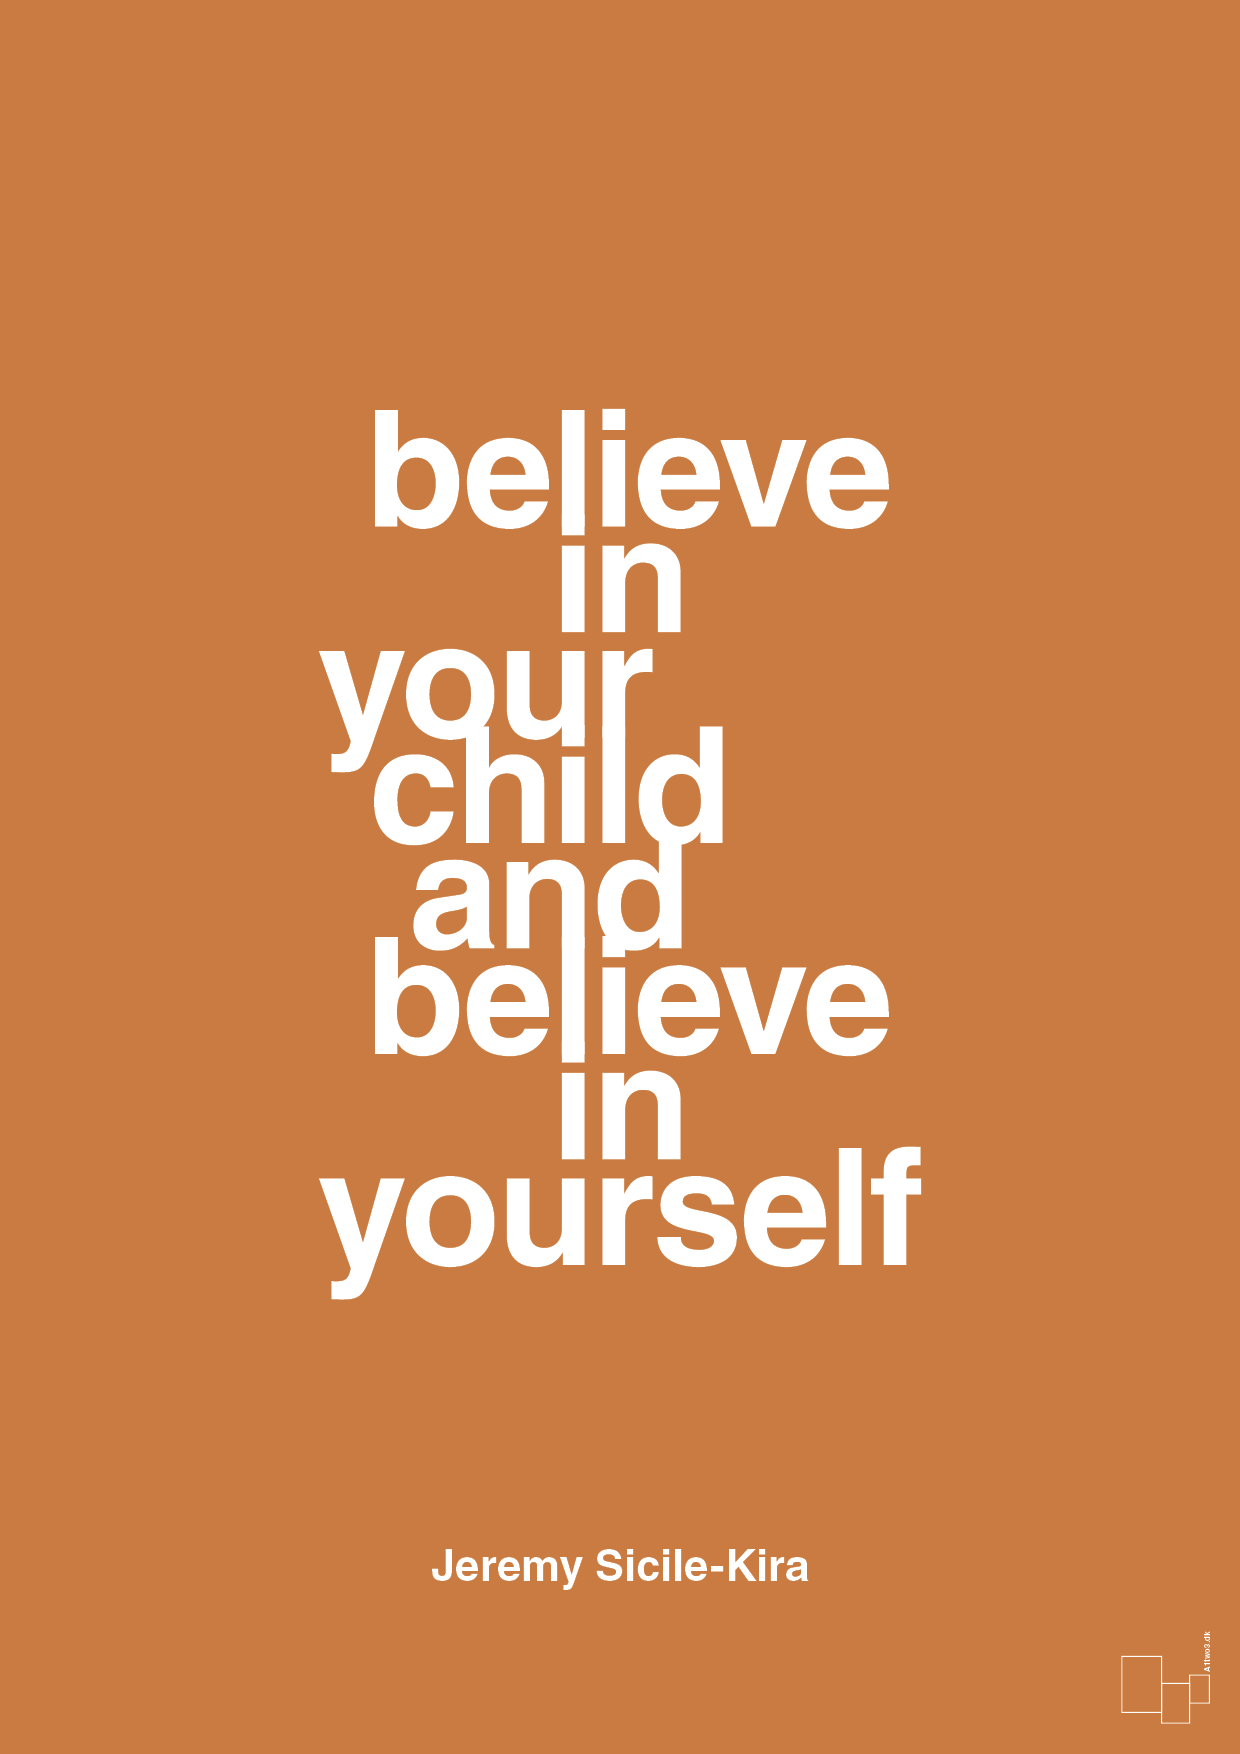 believe in your child and believe in yourself - Plakat med Samfund i Rumba Orange